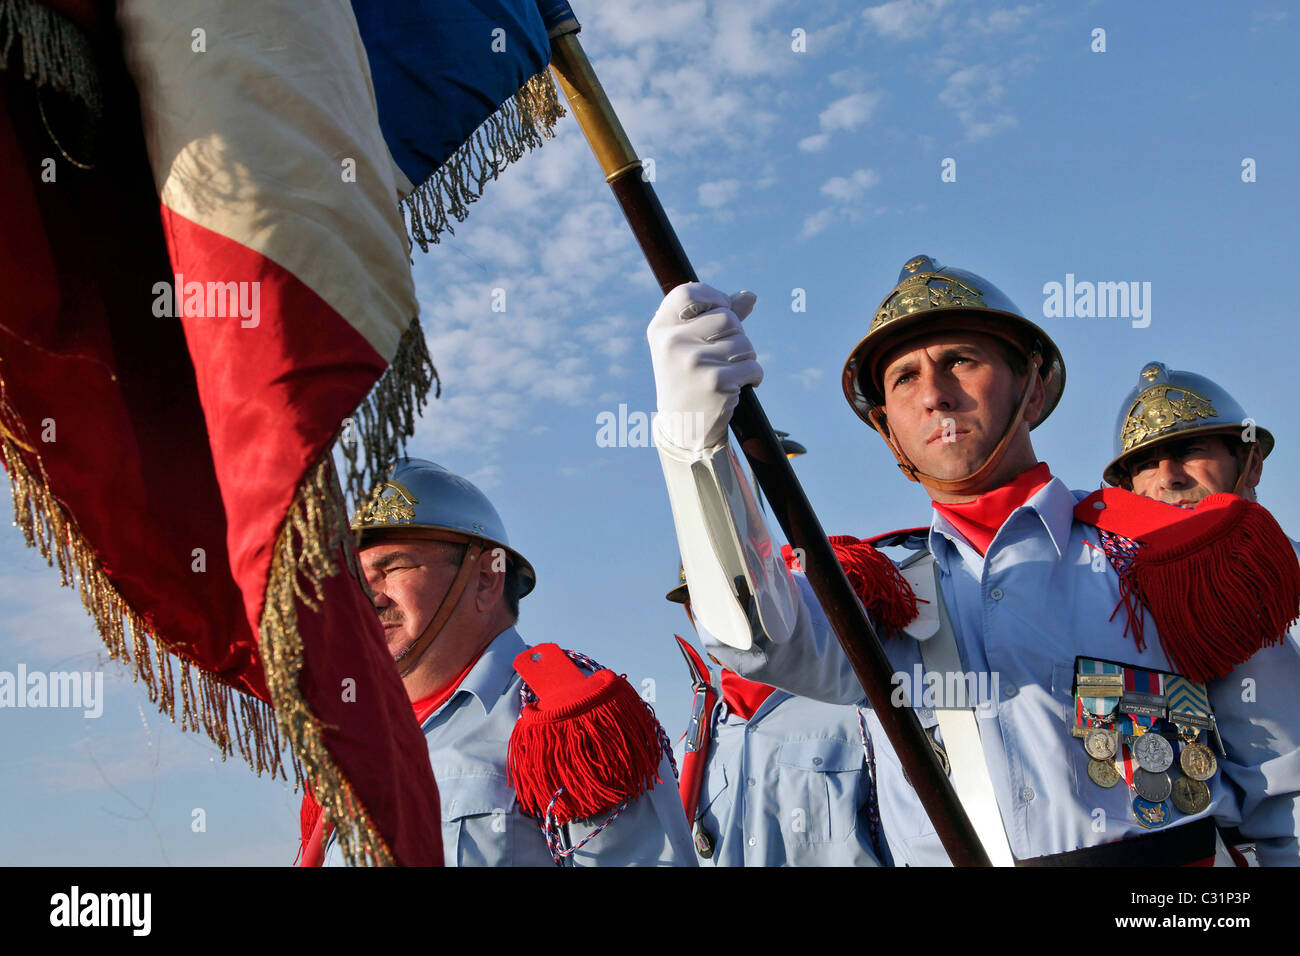 RAISING THE COLORS OF THE FNSPF, GUARDS WITH THE FLAG, 117TH CONGRESS OF FRENCH FIREFIGHTERS, ANGOULEME, FRANCE Stock Photo